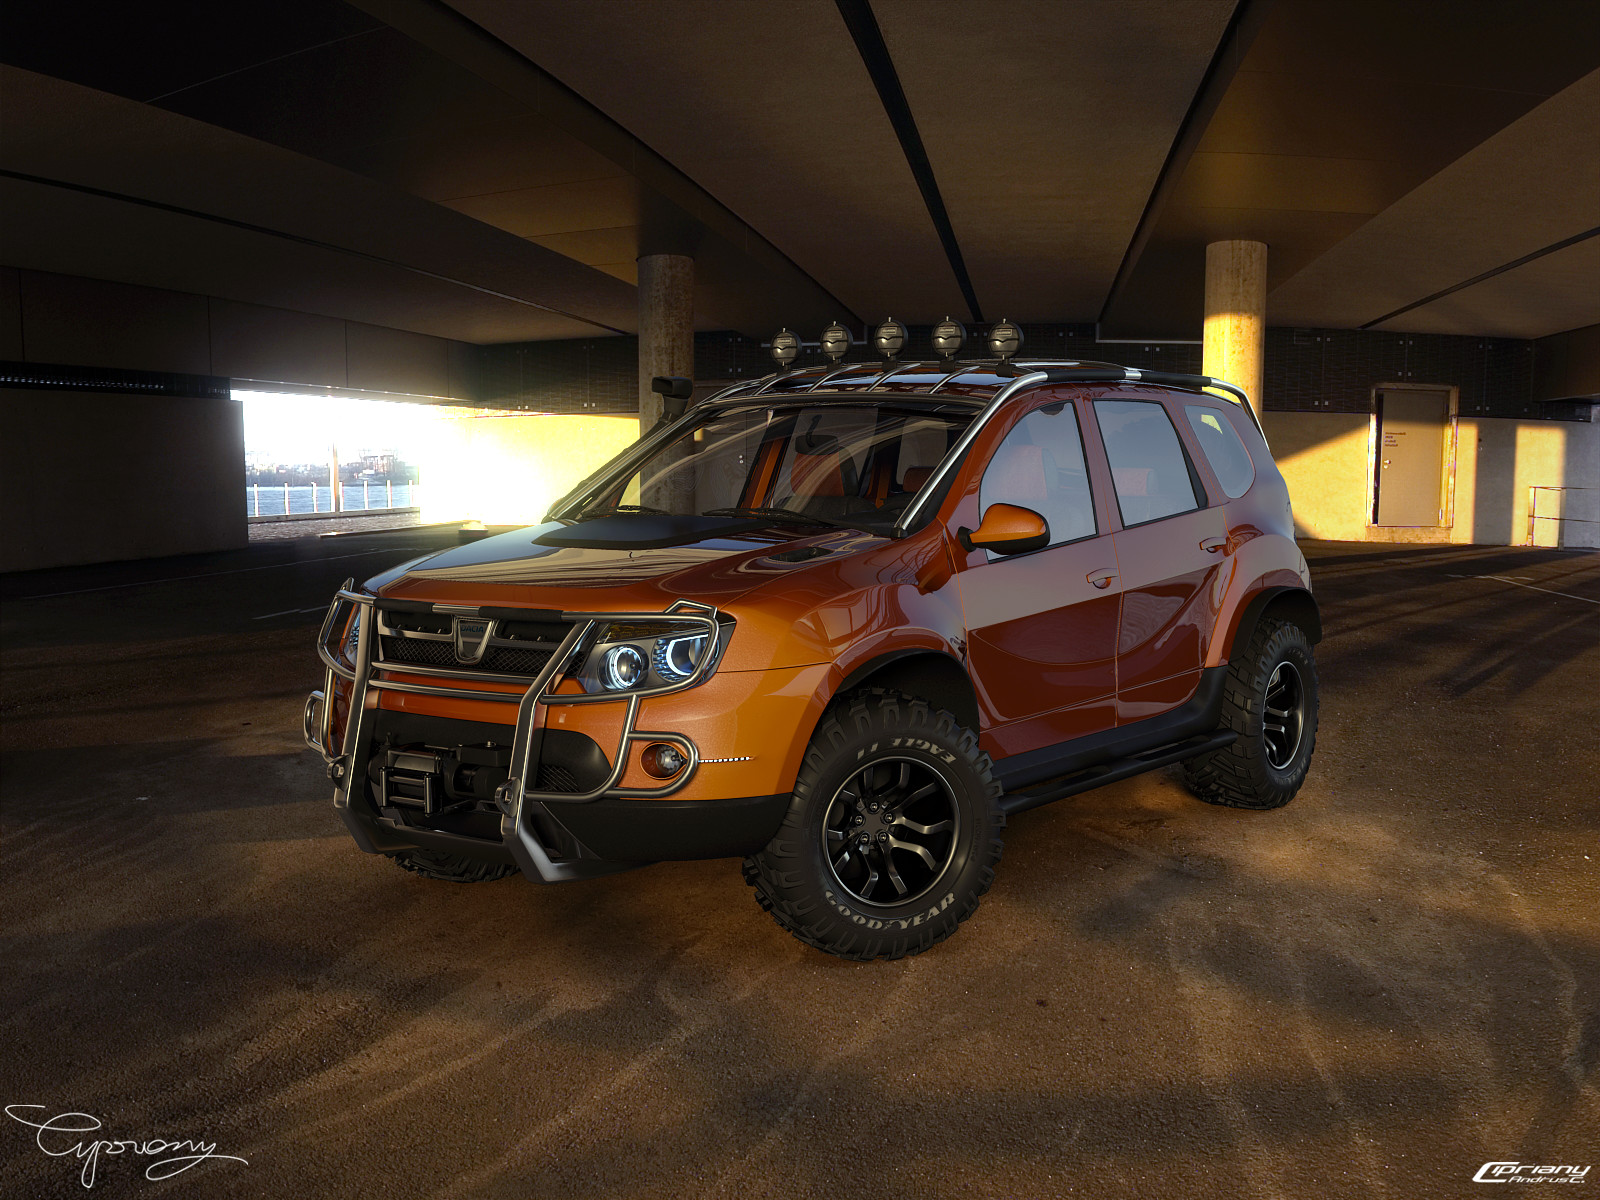 Dacia Duster Tuning 17 by cipriany on DeviantArt